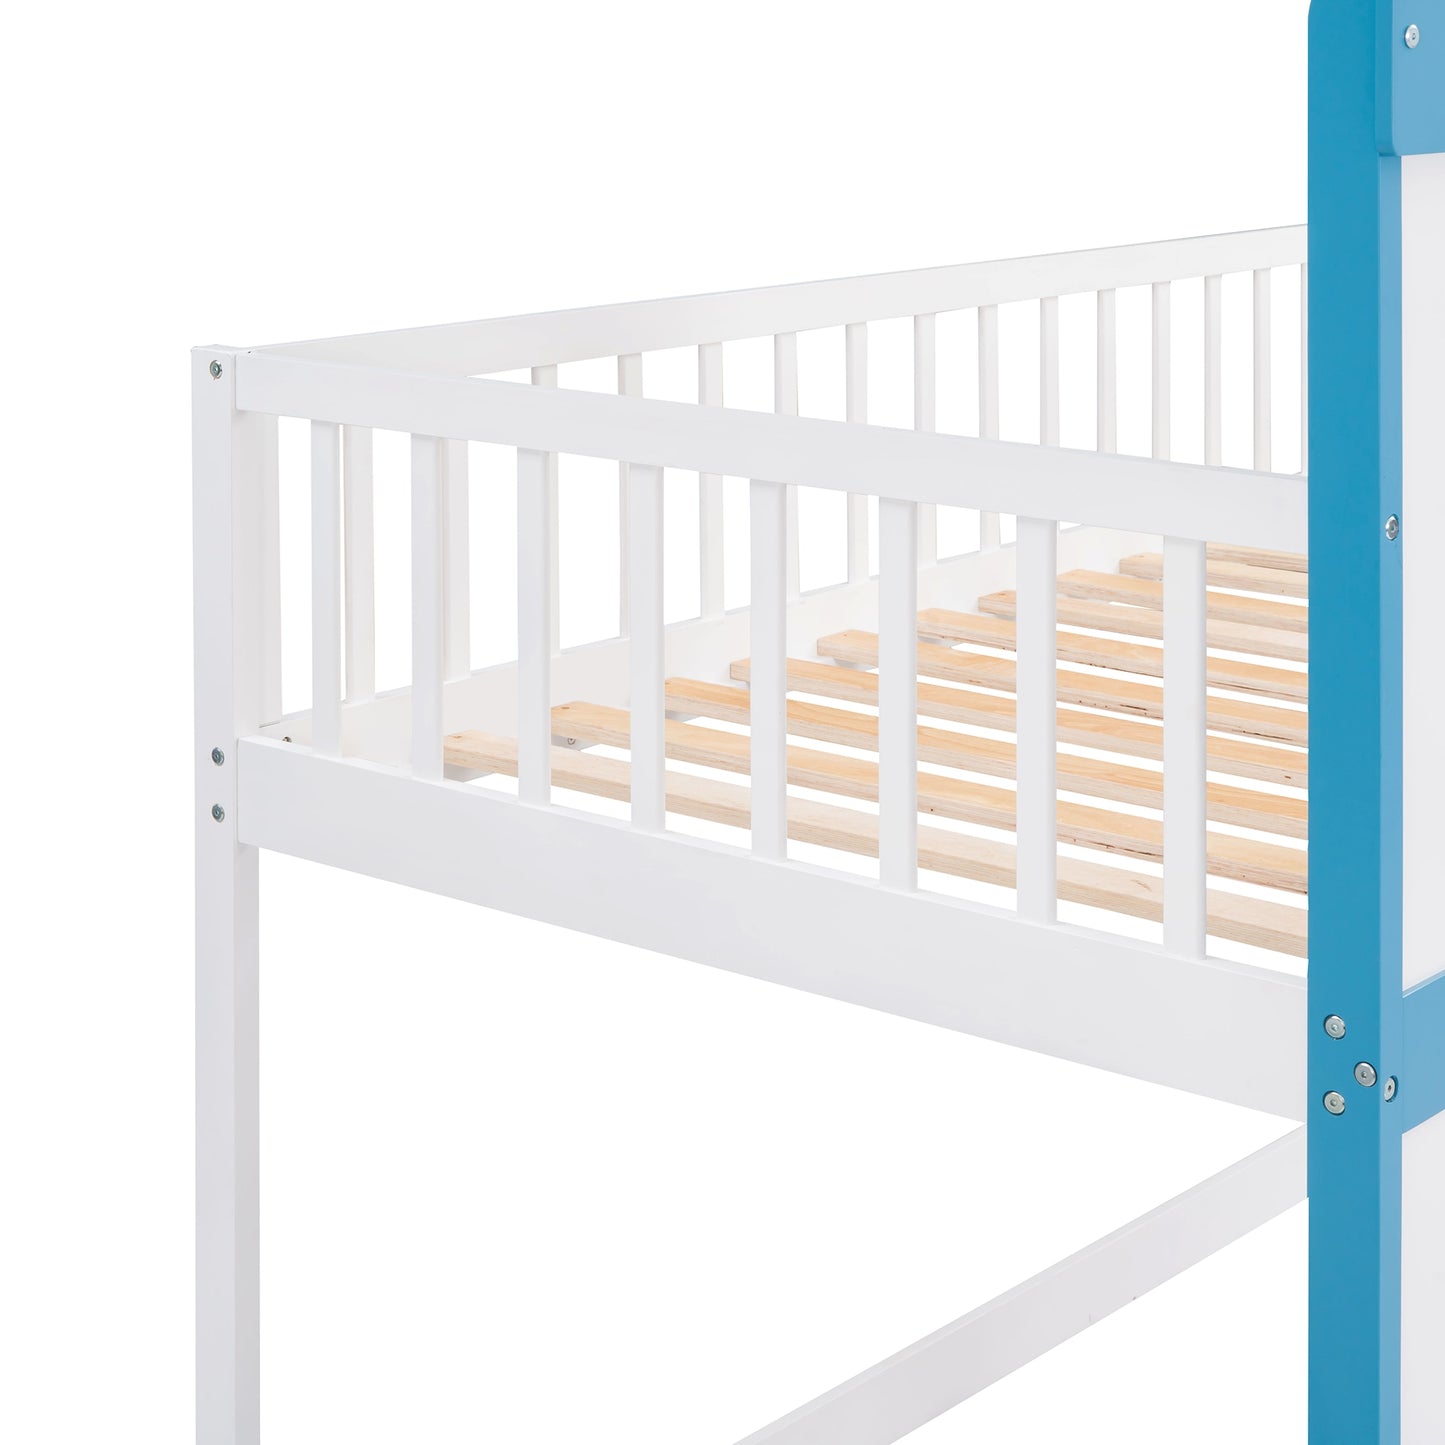 Twin Over Twin Castle Bunk Bed with Ladder - Pink/Blue